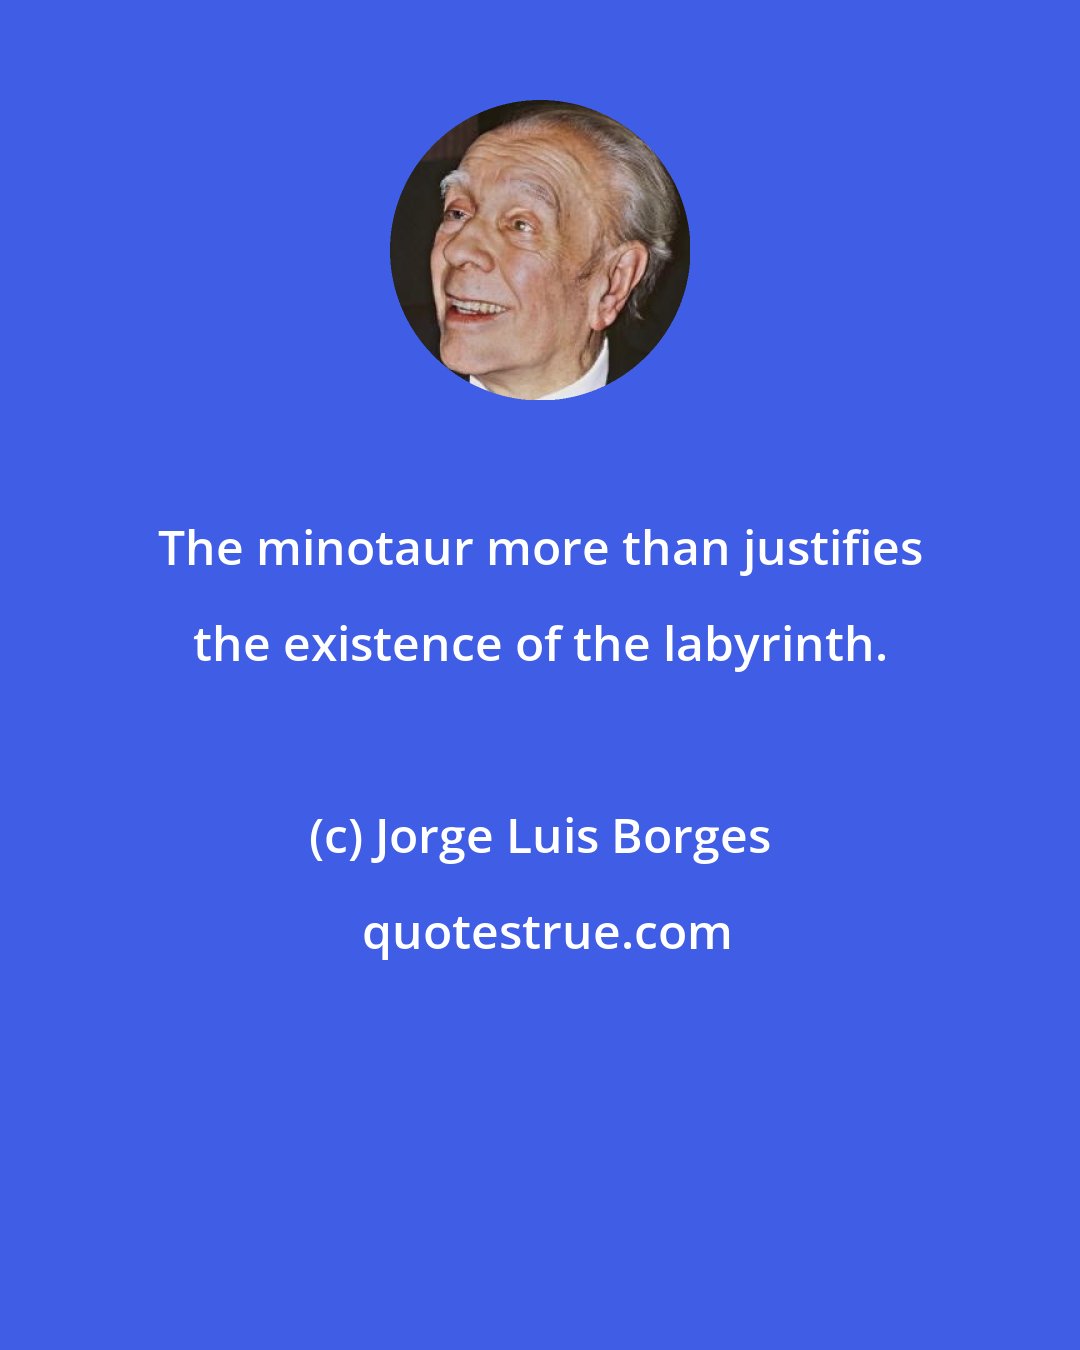 Jorge Luis Borges: The minotaur more than justifies the existence of the labyrinth.